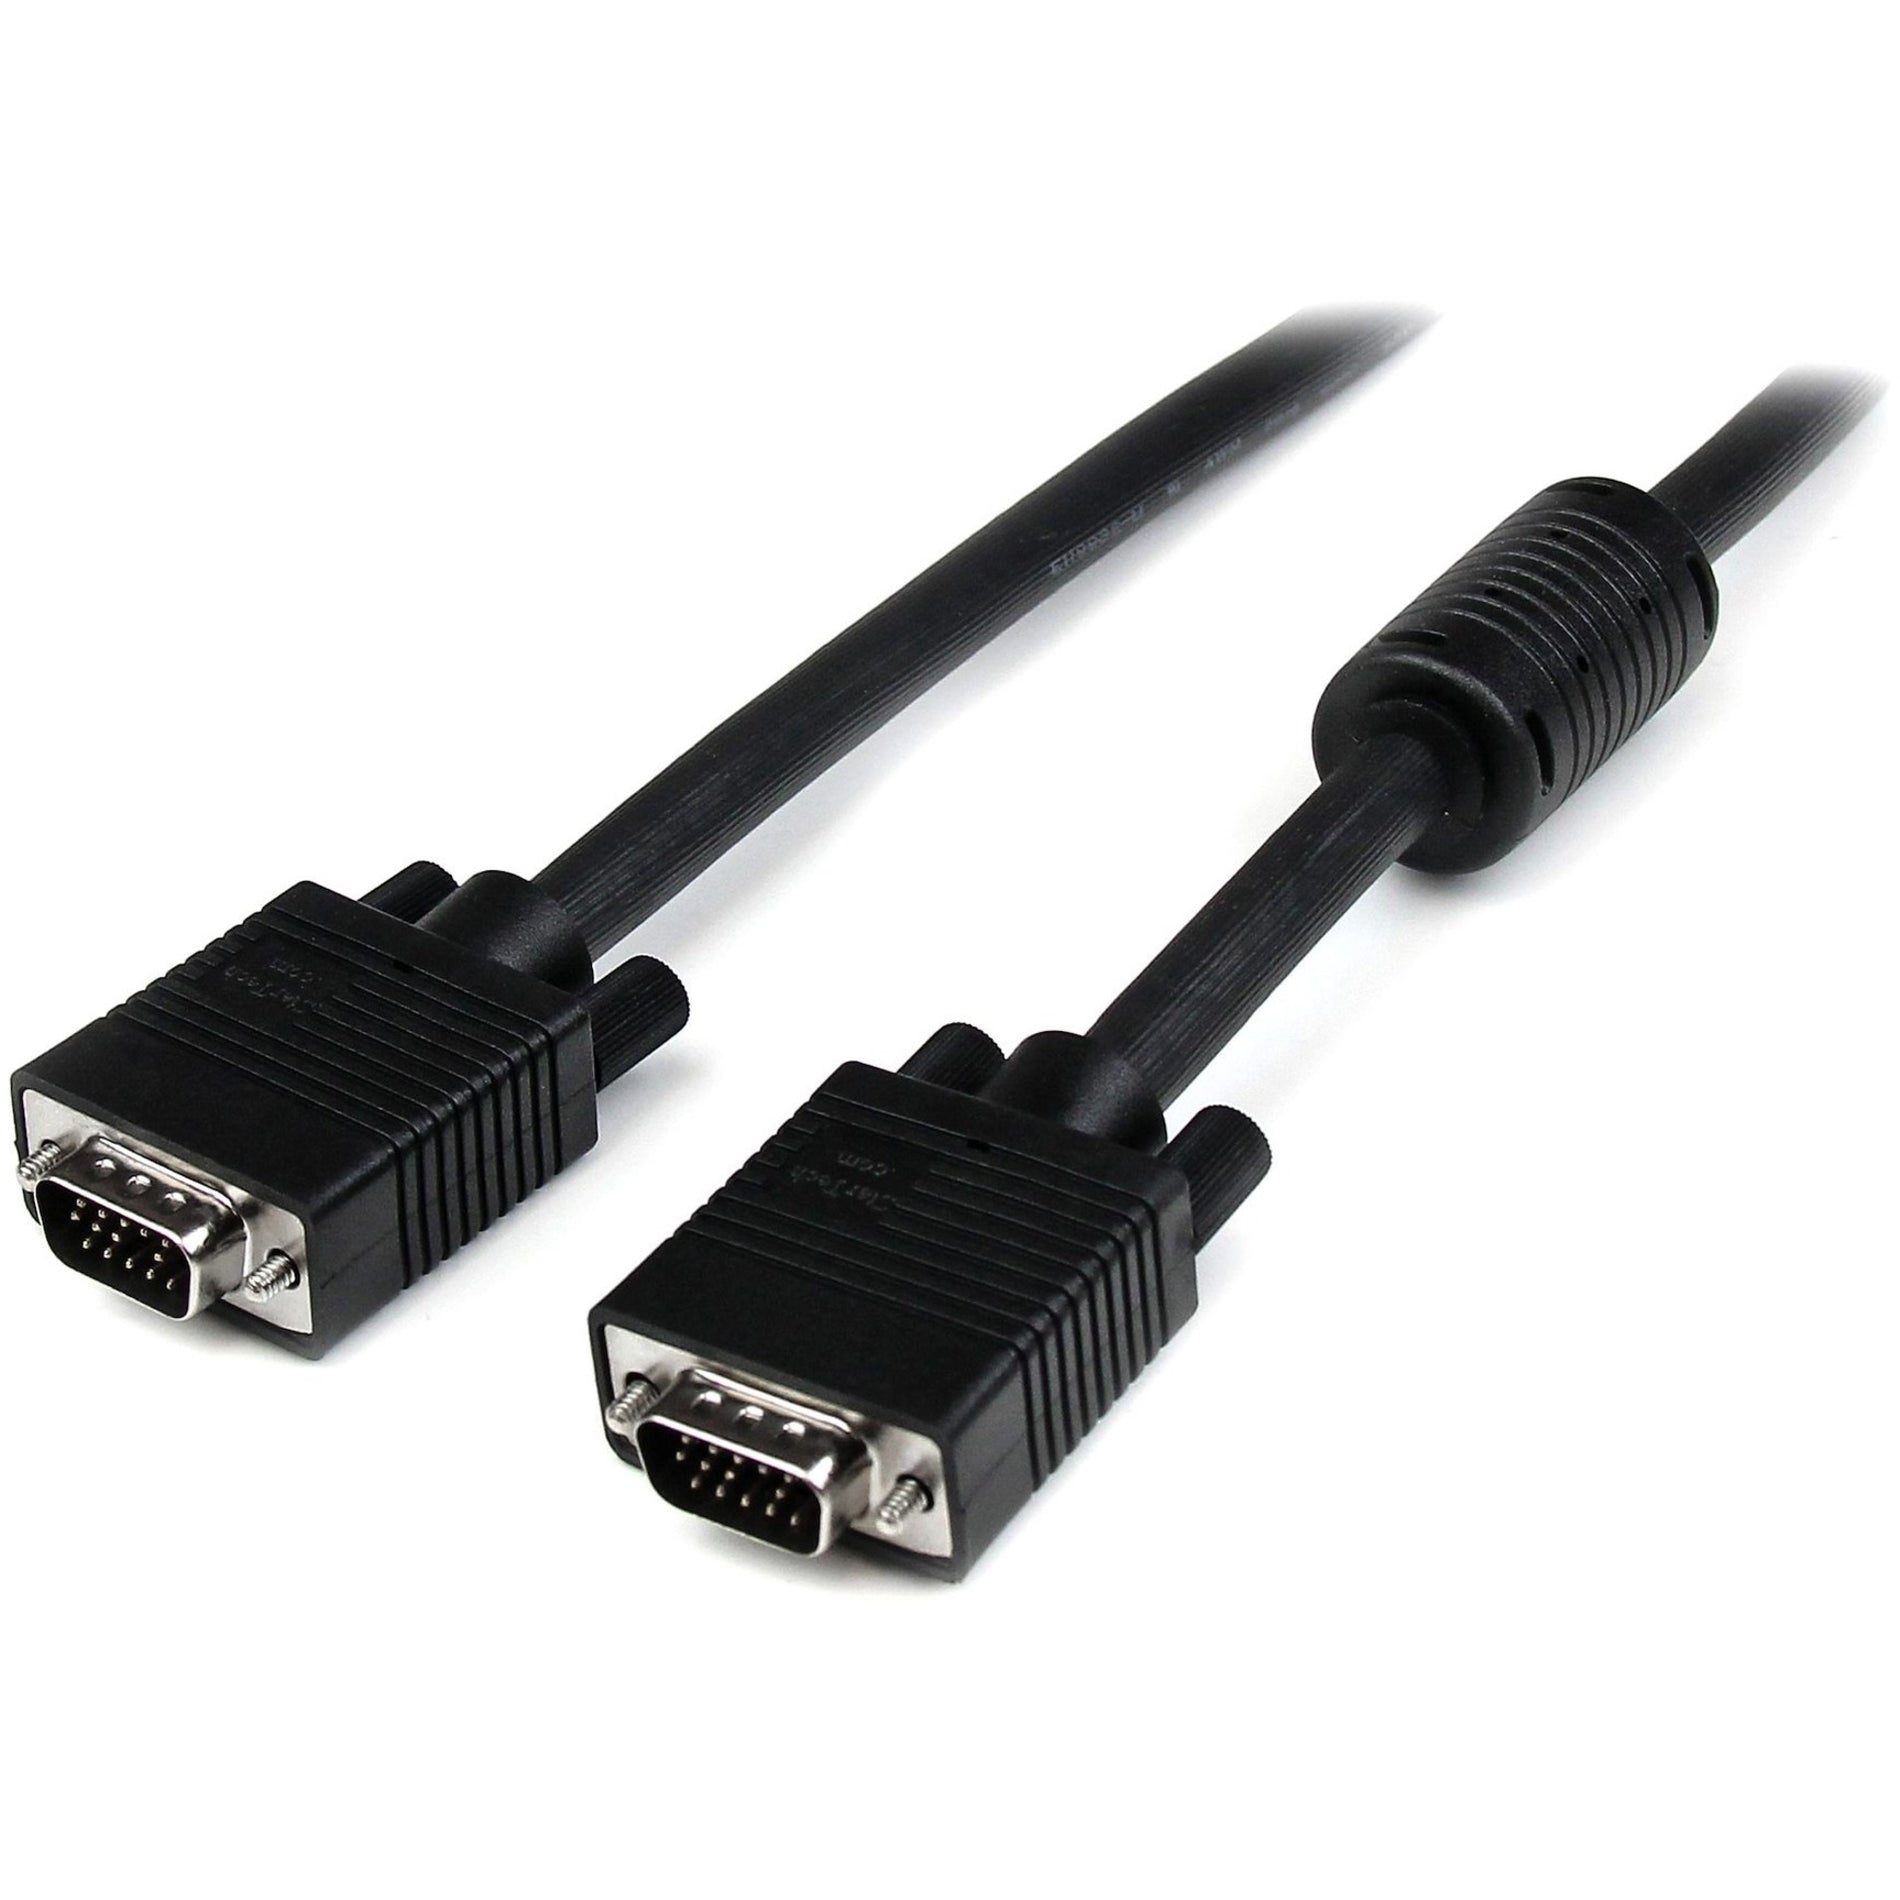 StarTech.com MXT105MMHQ 15 ft Coax High Resolution Monitor VGA Cable - HD15 Male/Male, Crystal Clear Display, EMI Protection